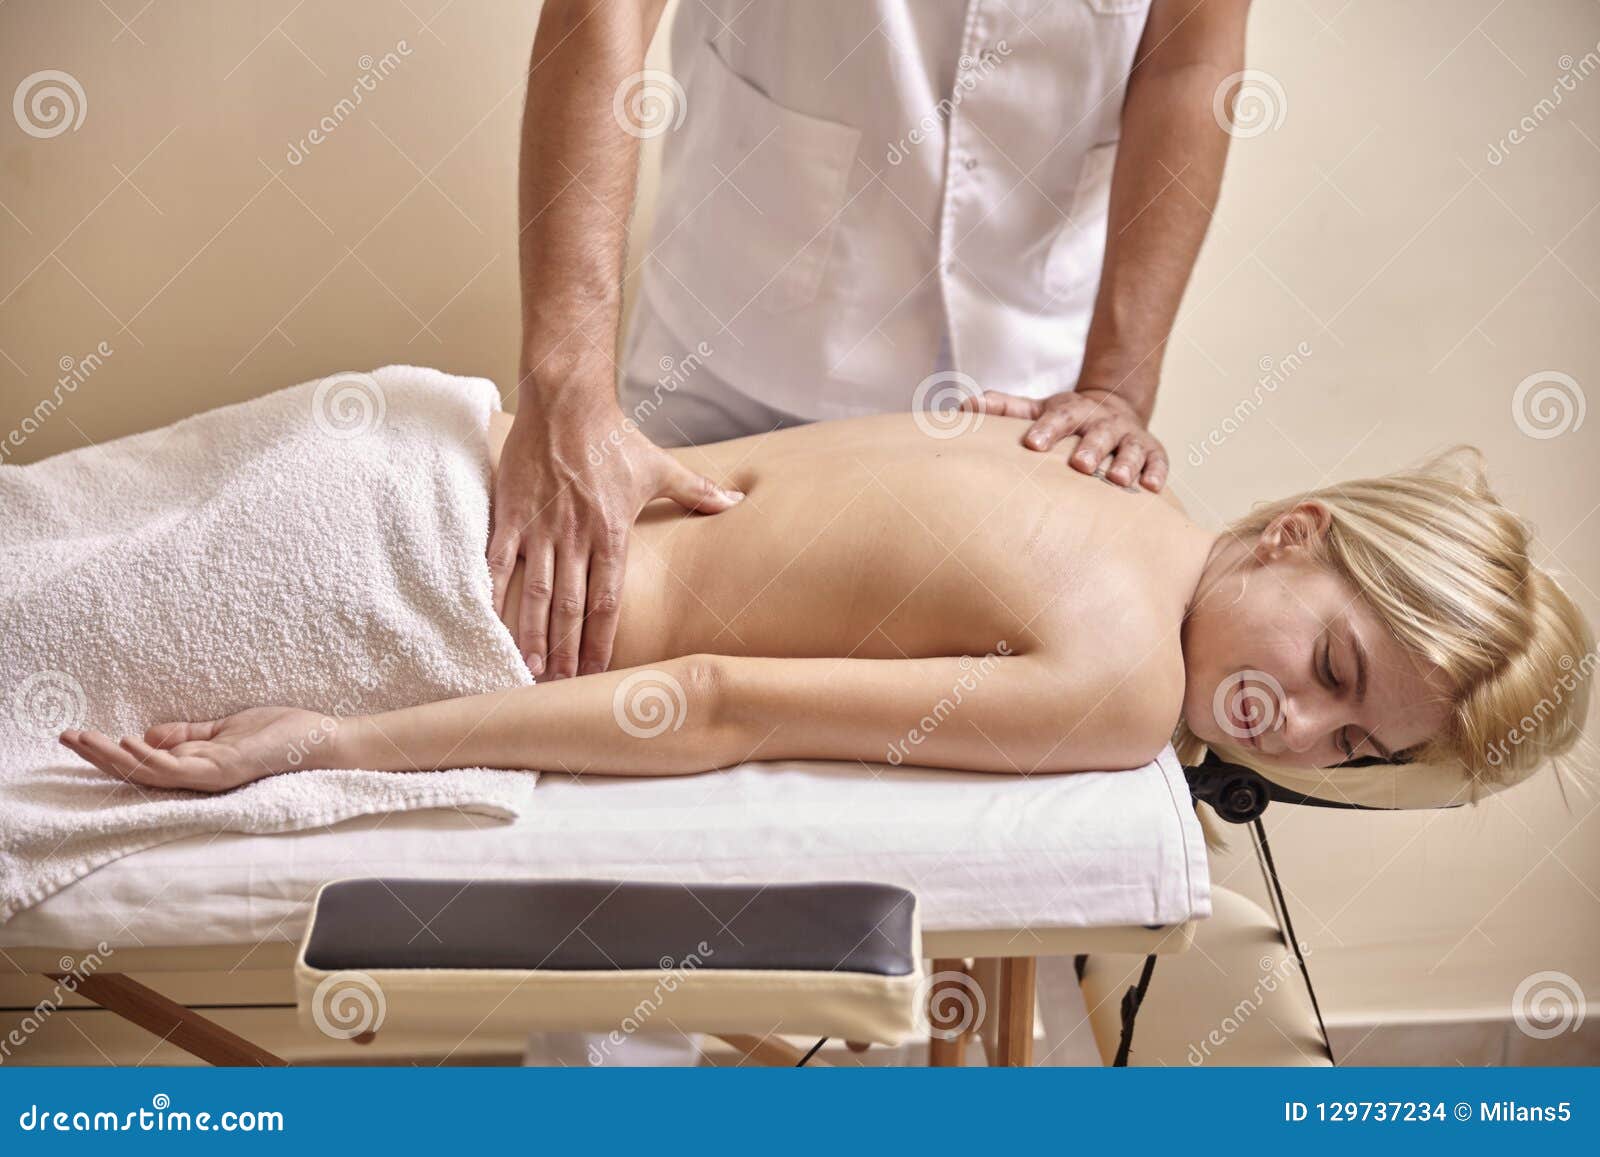 Hands of female therapist giving back massage to woman relaxing on